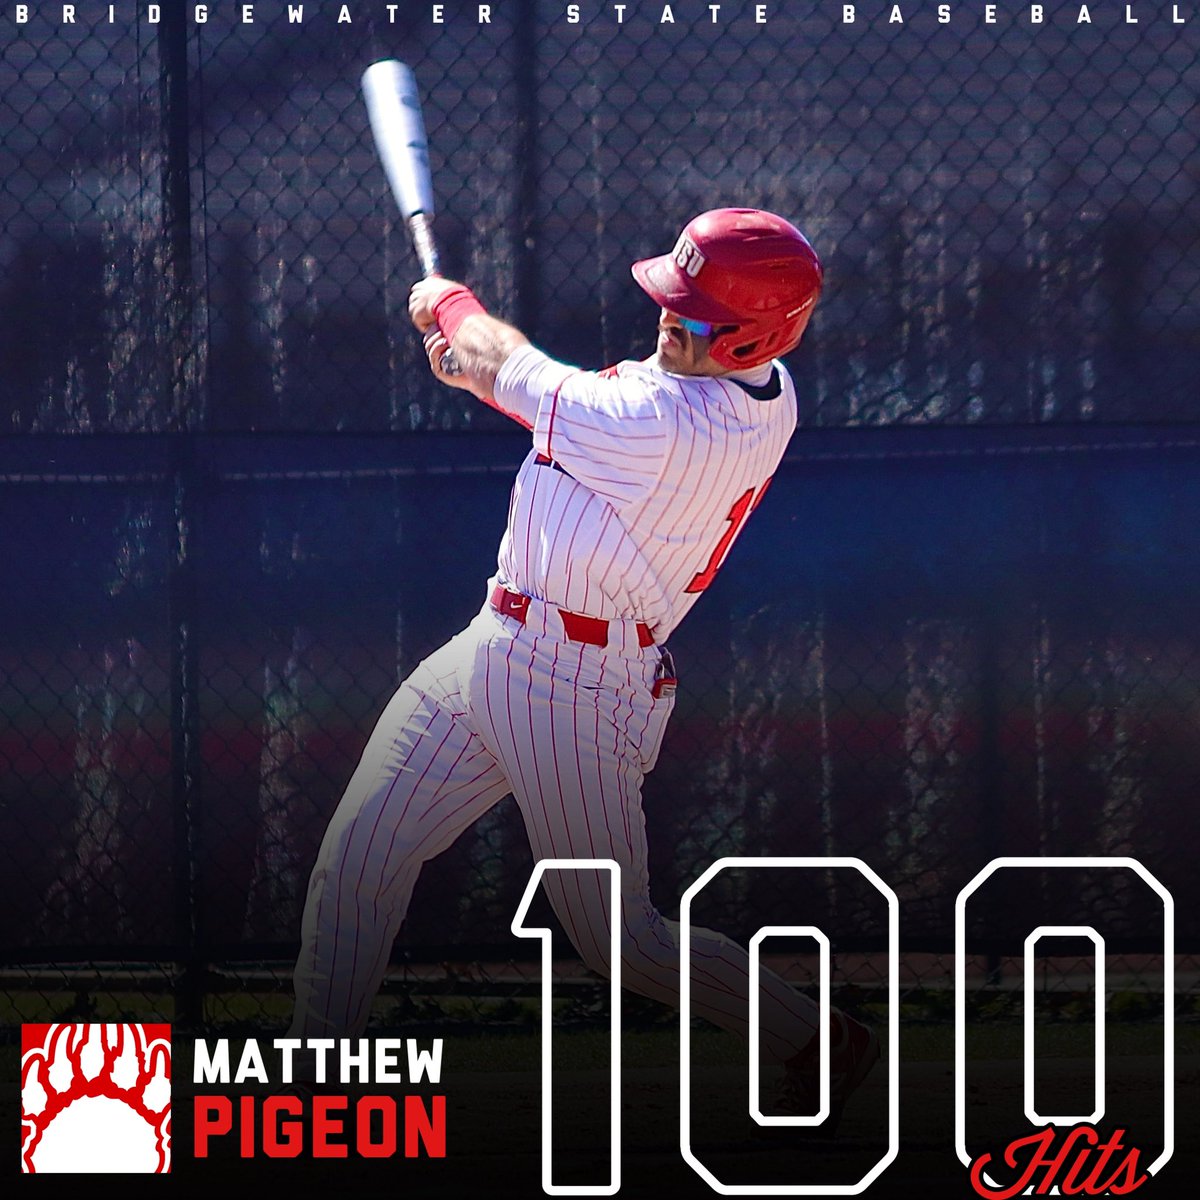 The Grad joins the 1️⃣0️⃣0️⃣ Club with a push bunt single…who would’ve thought Congrats Cap! #BearDlown